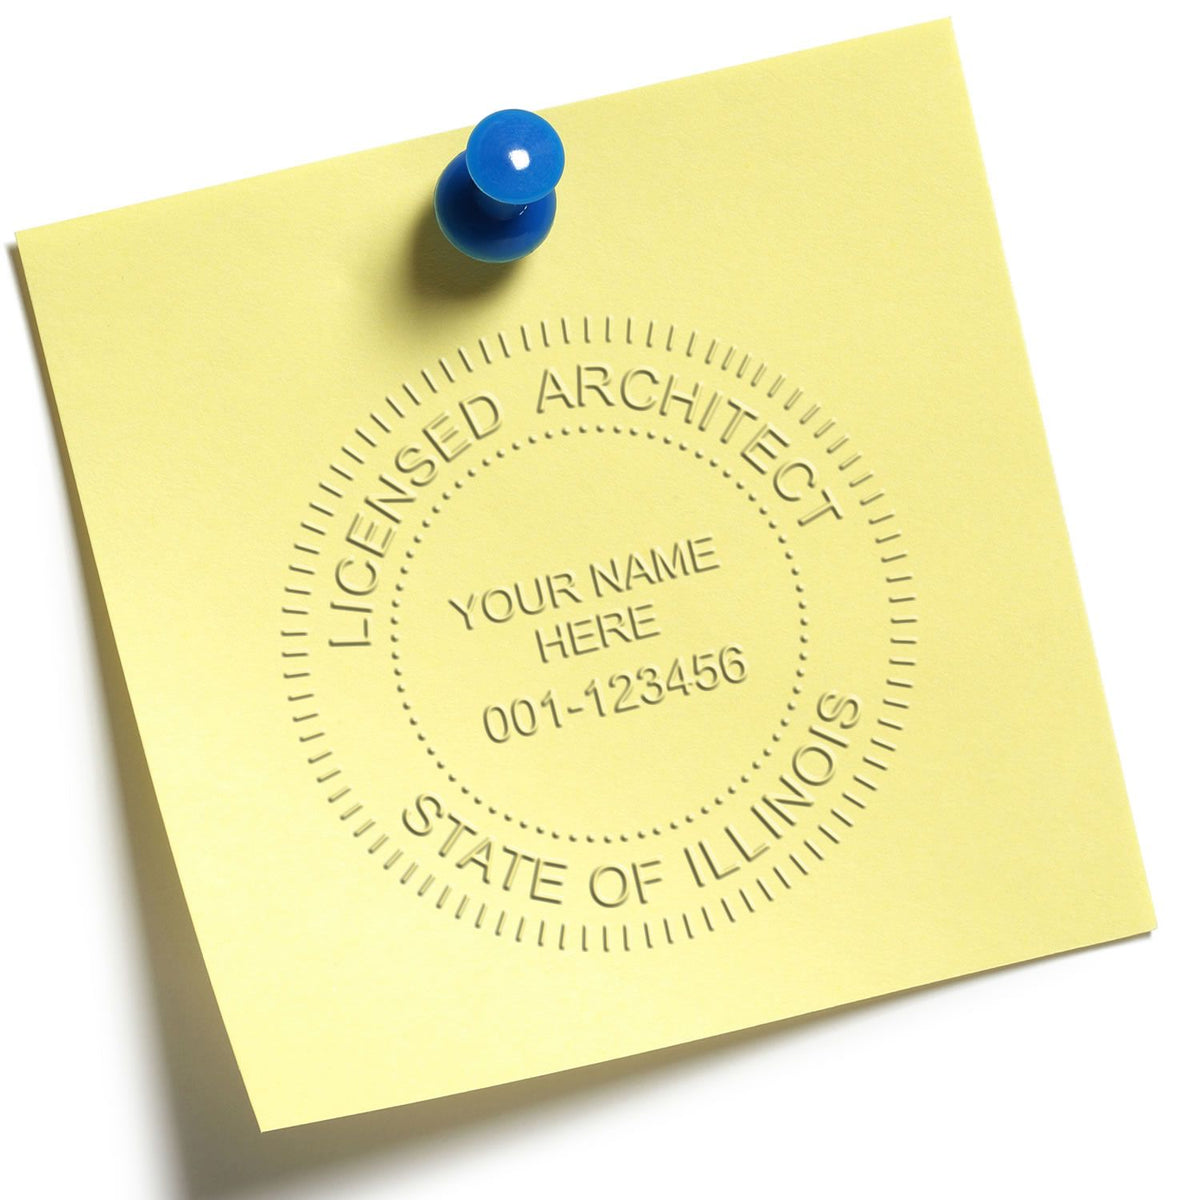 An alternative view of the Hybrid Illinois Architect Seal stamped on a sheet of paper showing the image in use